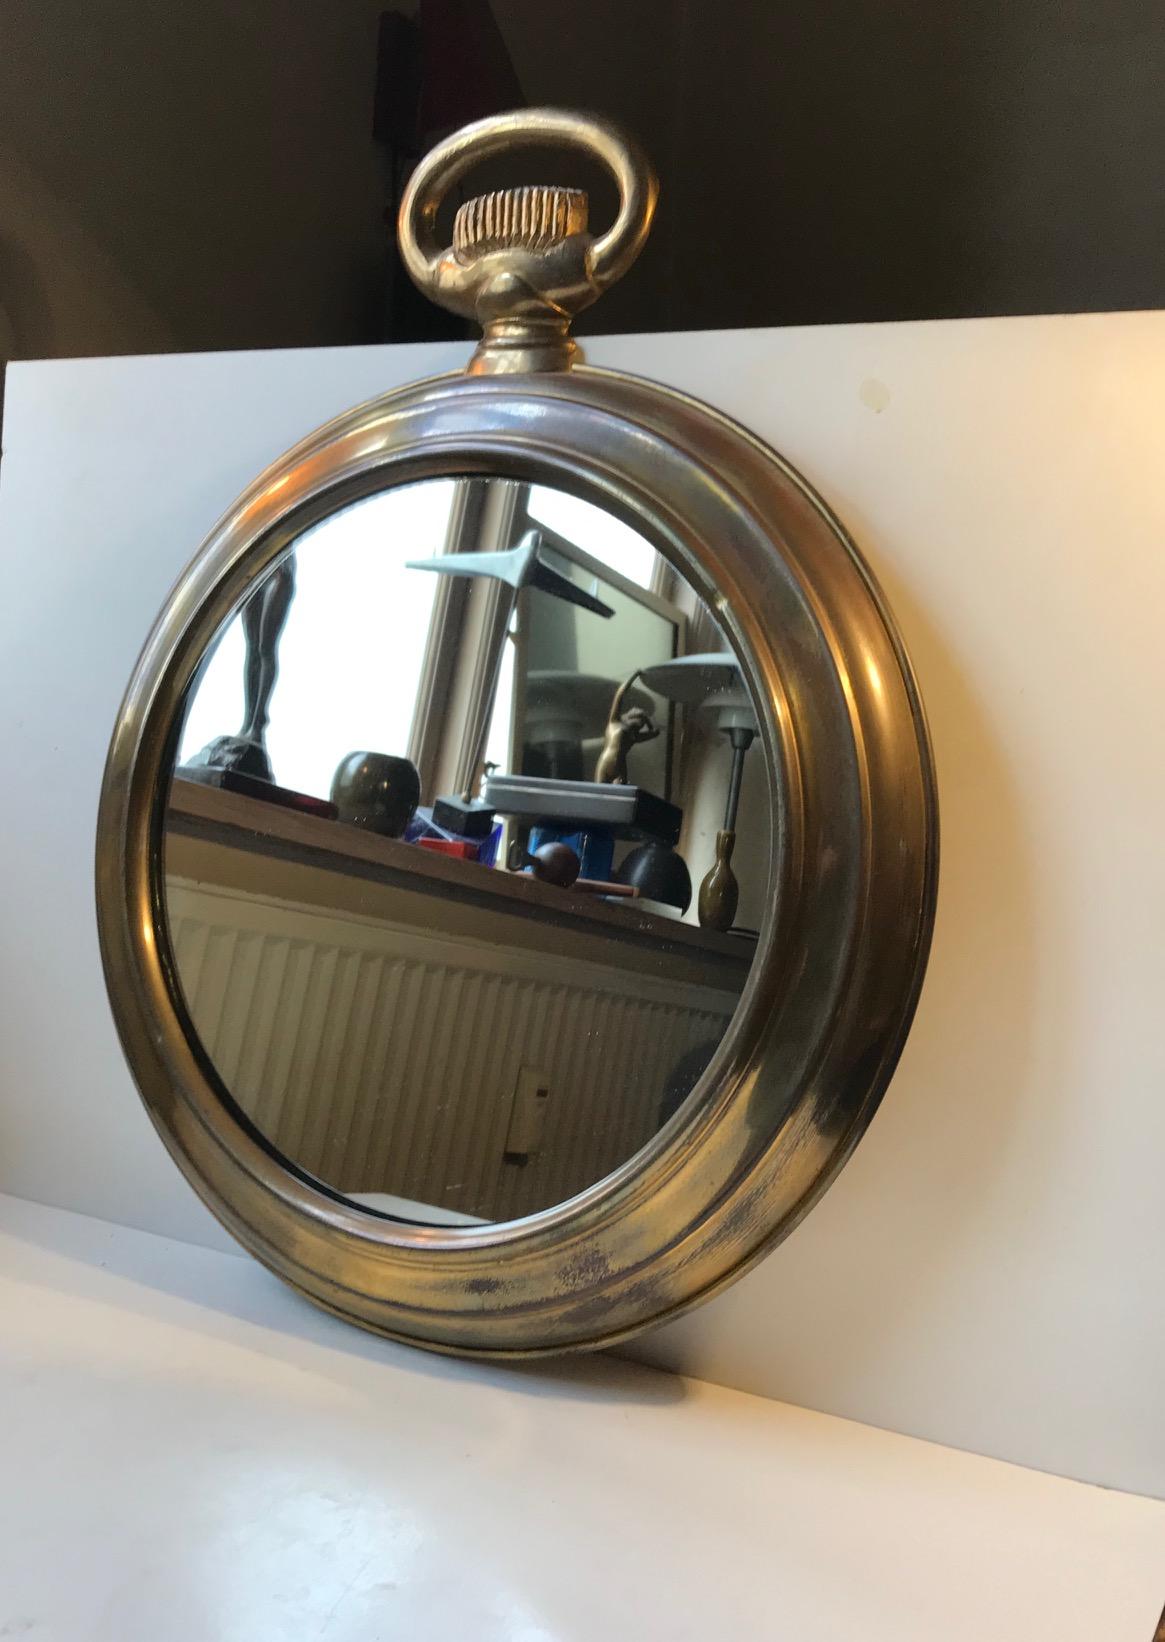 A round brass pocket watch mirror made in France during the 1950s. Its frame is made from solid brass that has developed a Natural patina. Its suitable for bathrooms, small alcoves or in your entrance reception area. Dimensions: 49 W x 63 H x 6.5 D